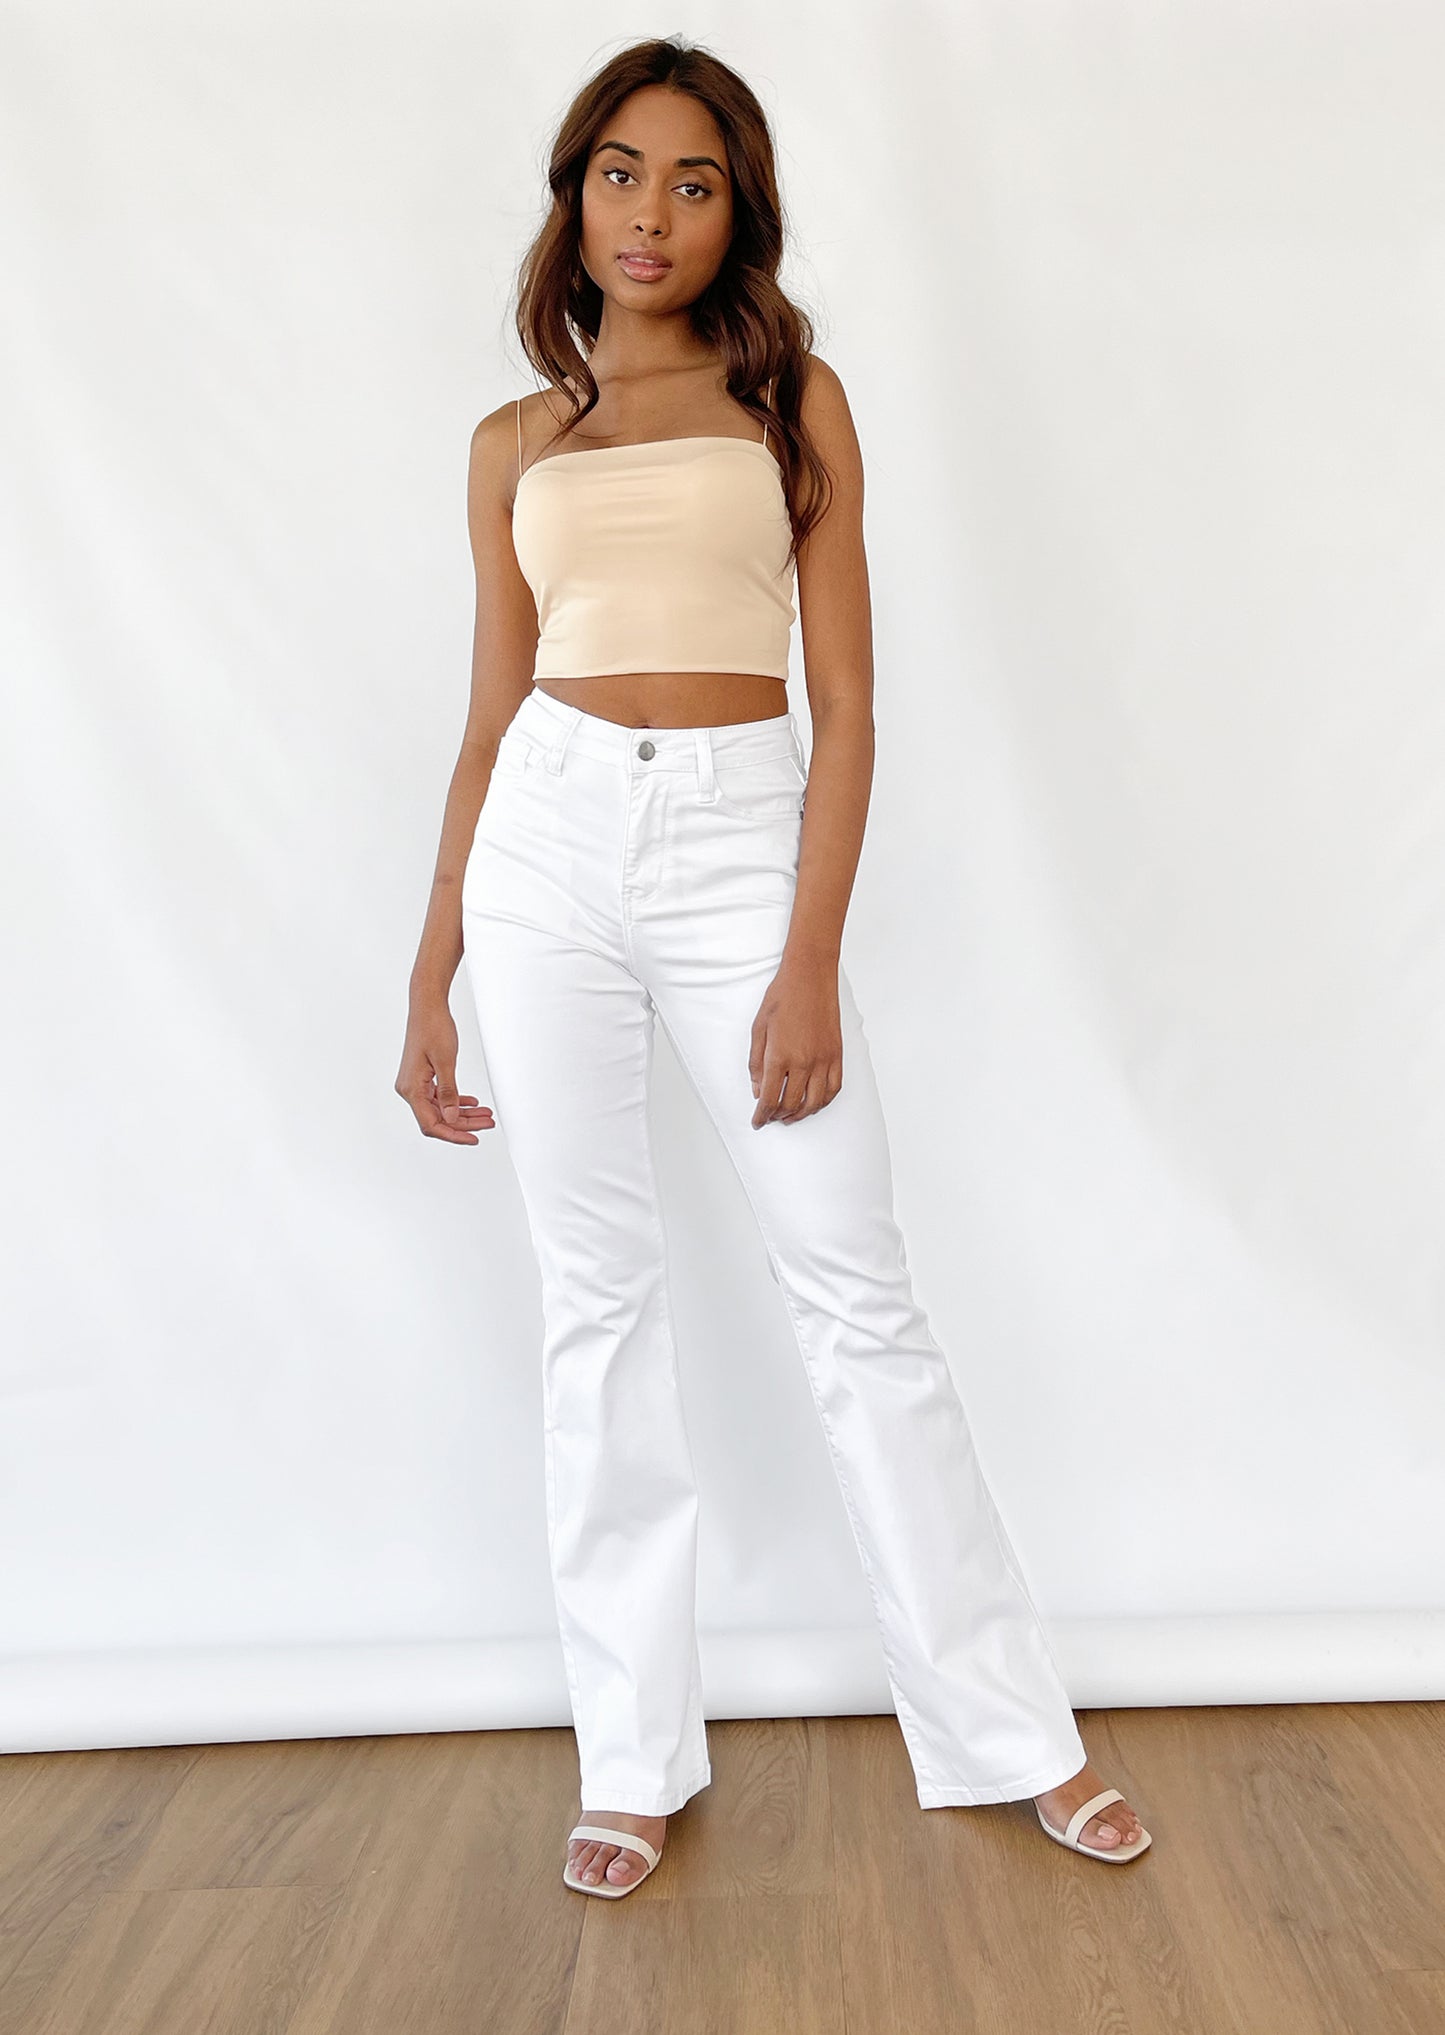 Flare jeans in white